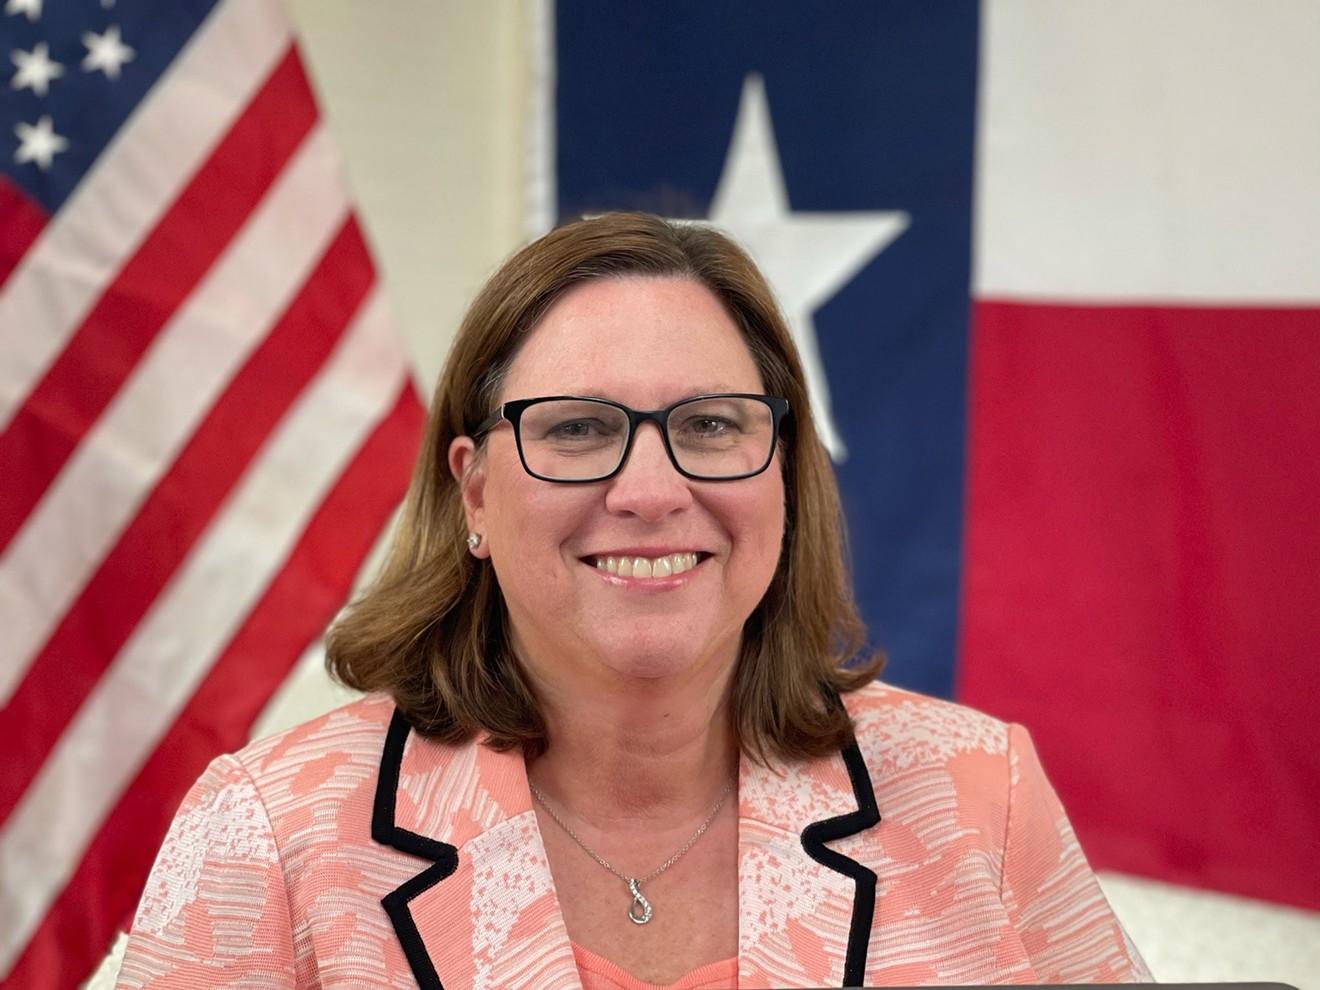 State Rep. Julie Johnson, a Farmers Branch Democrat, was elected in 2018 to represent Texas House District 115.